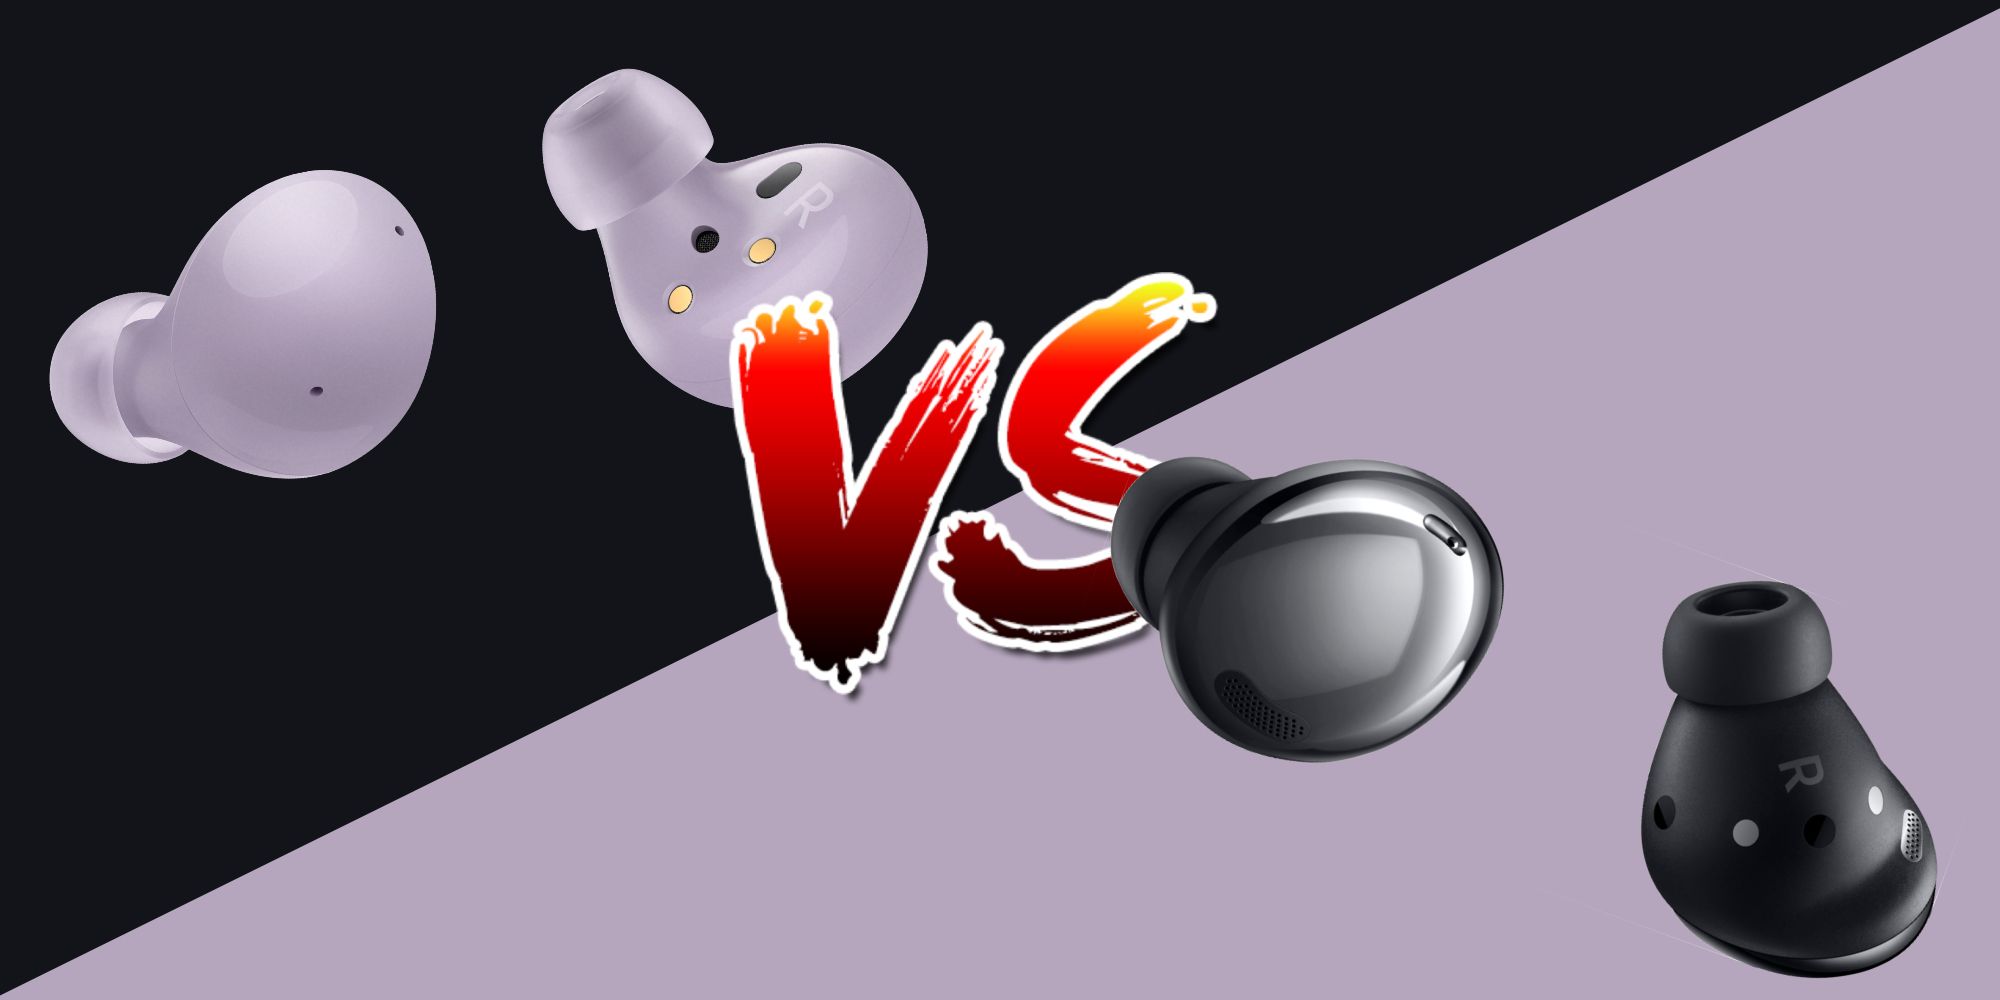 Samsung Galaxy Buds 2 Vs. Buds Pro: Should You Spend $150 or $200?